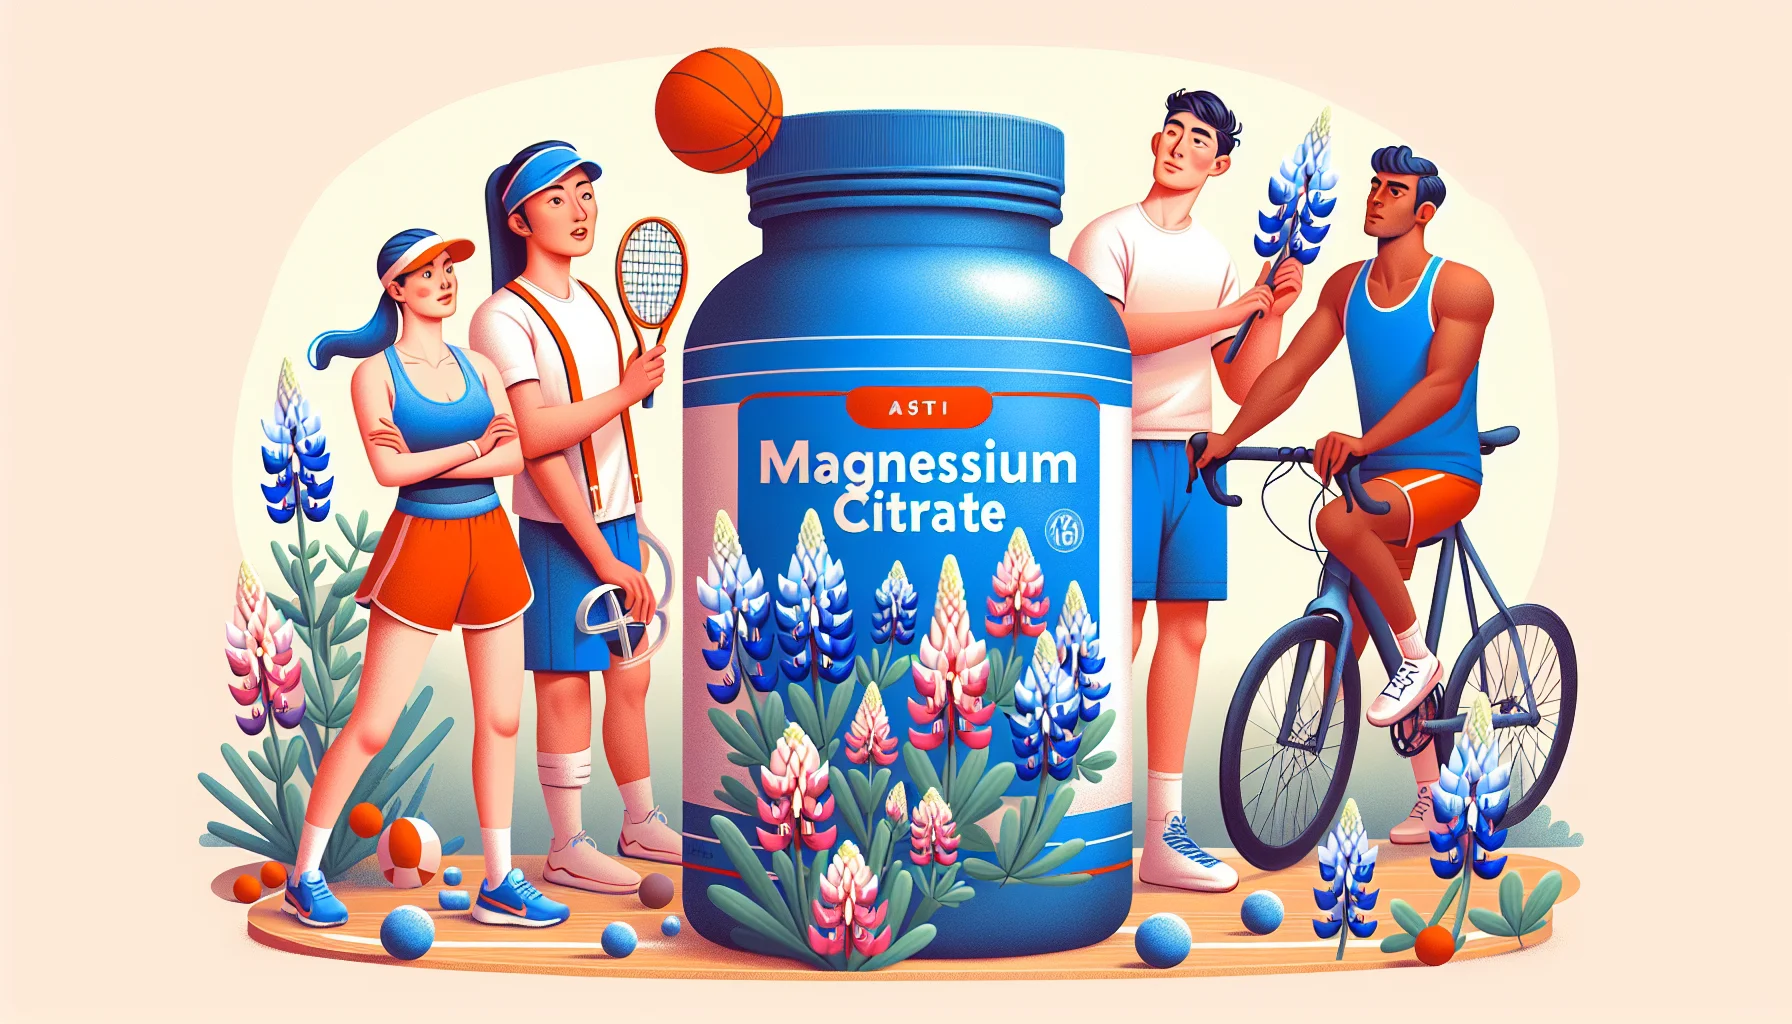 Design a fun and engaging image featuring a bottle of magnesium citrate supplement painted with lively bluebonnet flowers. In this scenario, various athletes from different sports disciplines are admiring it. Show a Caucasian female tennis player with her racket in hand looking intrigued, and an Asian male basketball player bouncing a ball while examining the product. Finally, let's have a Middle-Eastern male cyclist standing with his bike, peering at the bottle with fascination. Remember to set a vibrant and lighthearted atmosphere to emphasize the fun aspect of sports supplement use.